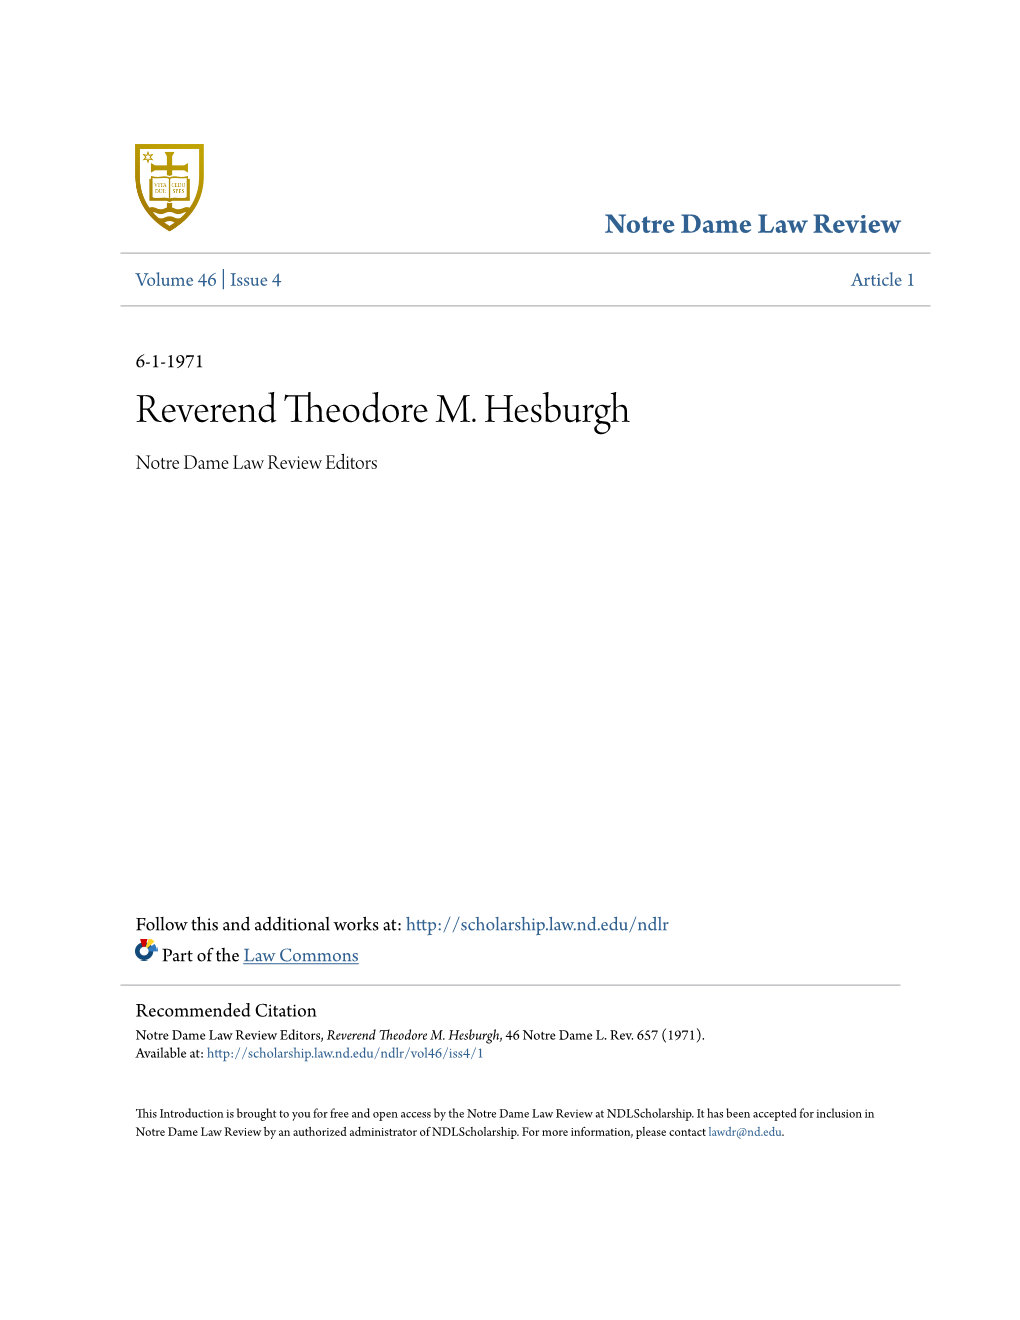 Reverend Theodore M. Hesburgh Notre Dame Law Review Editors